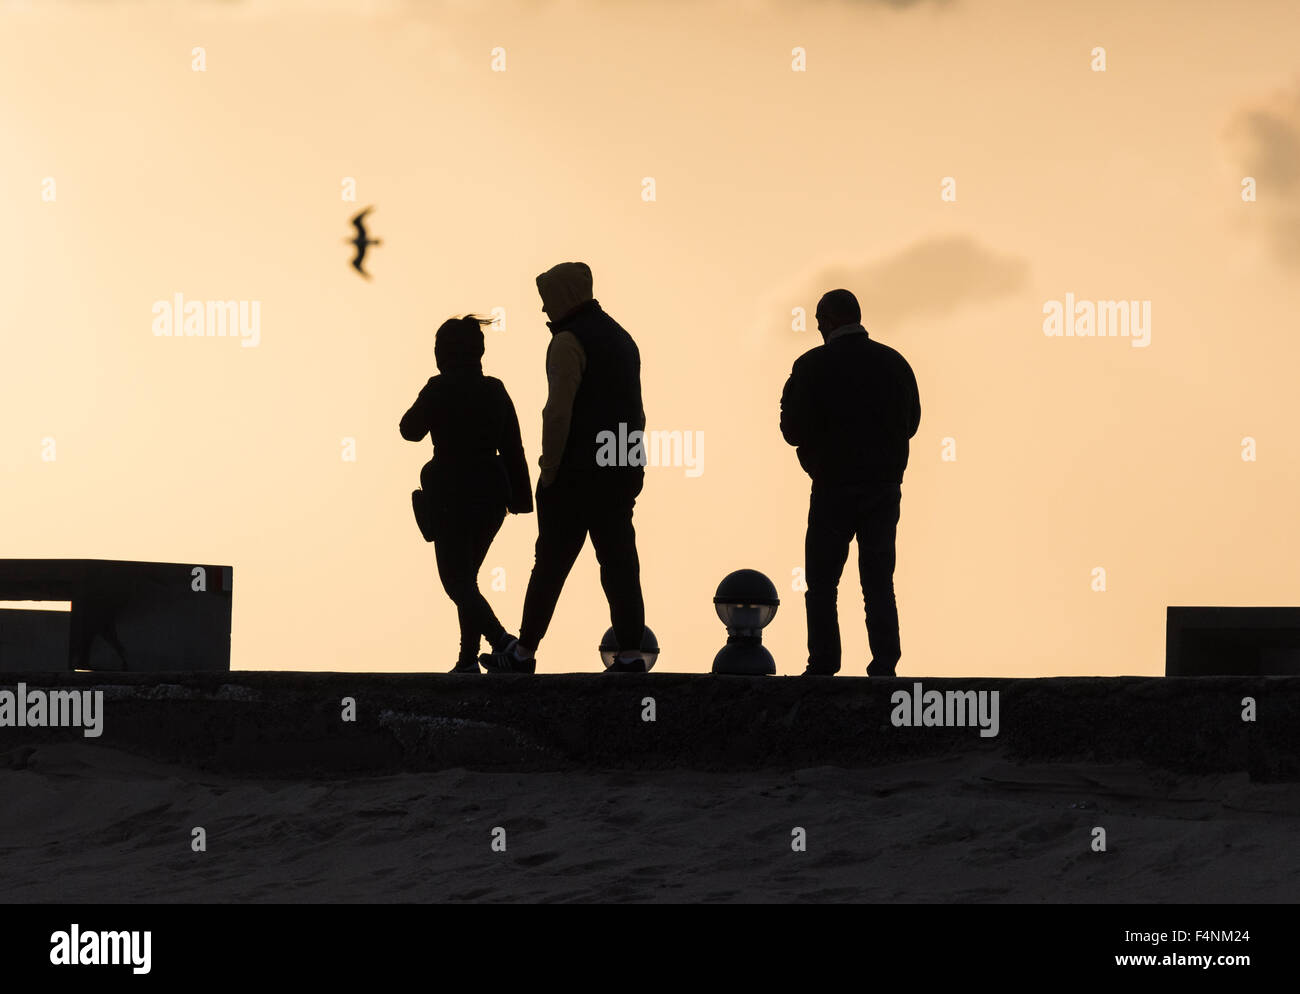 Silhouettes of people. Stock Photo